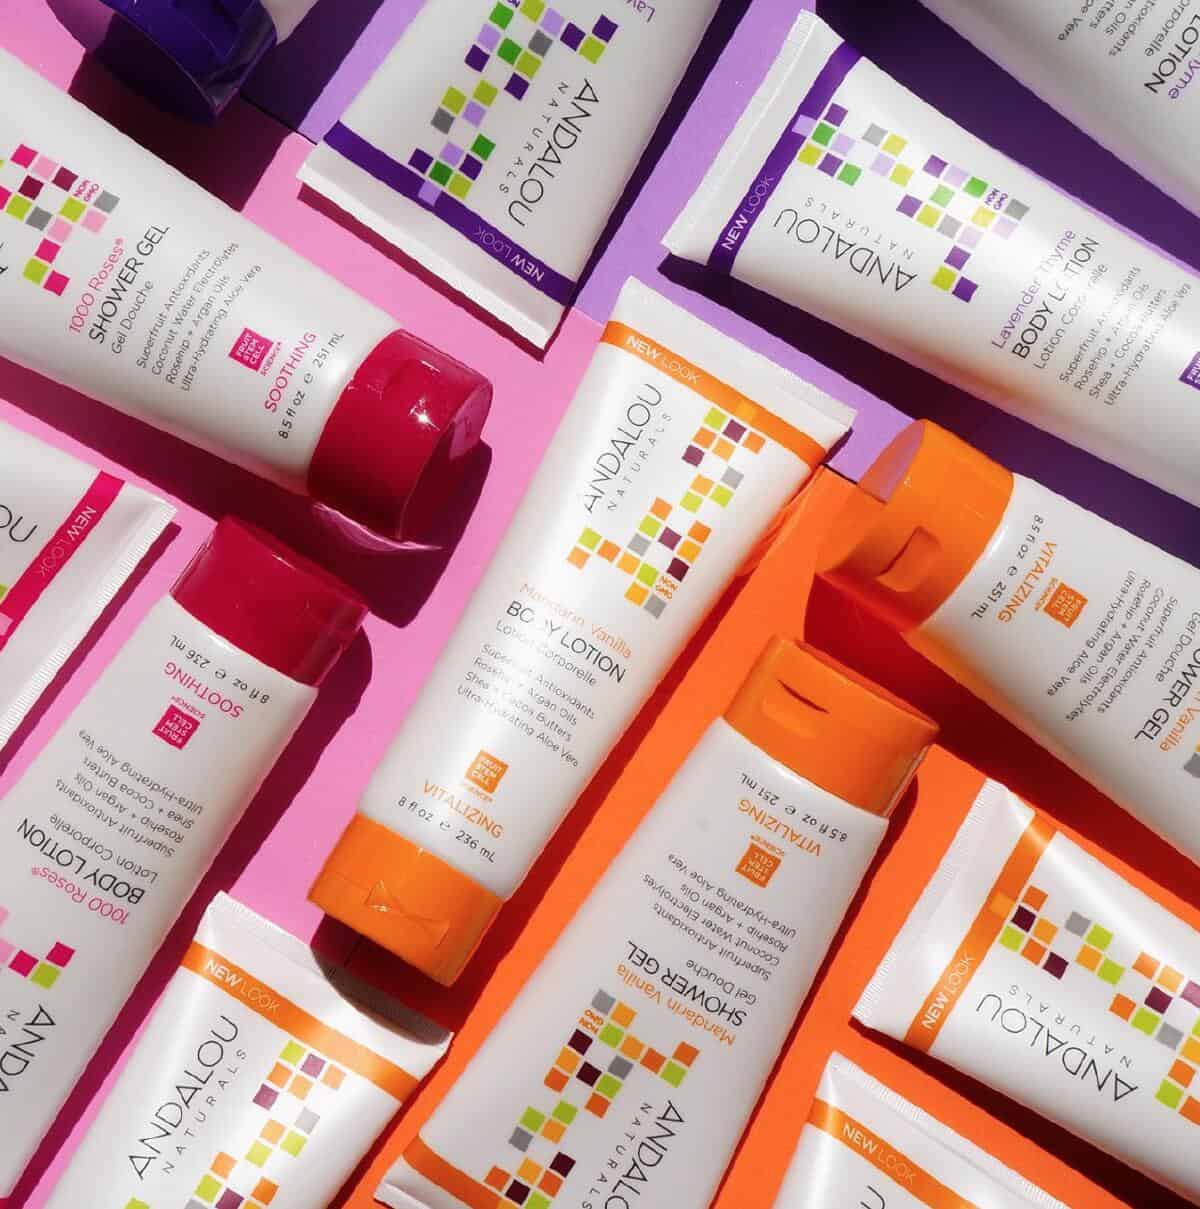 A puzzle arrangement of Andalou Naturals body lotions and shower gels on a hot pink background. 